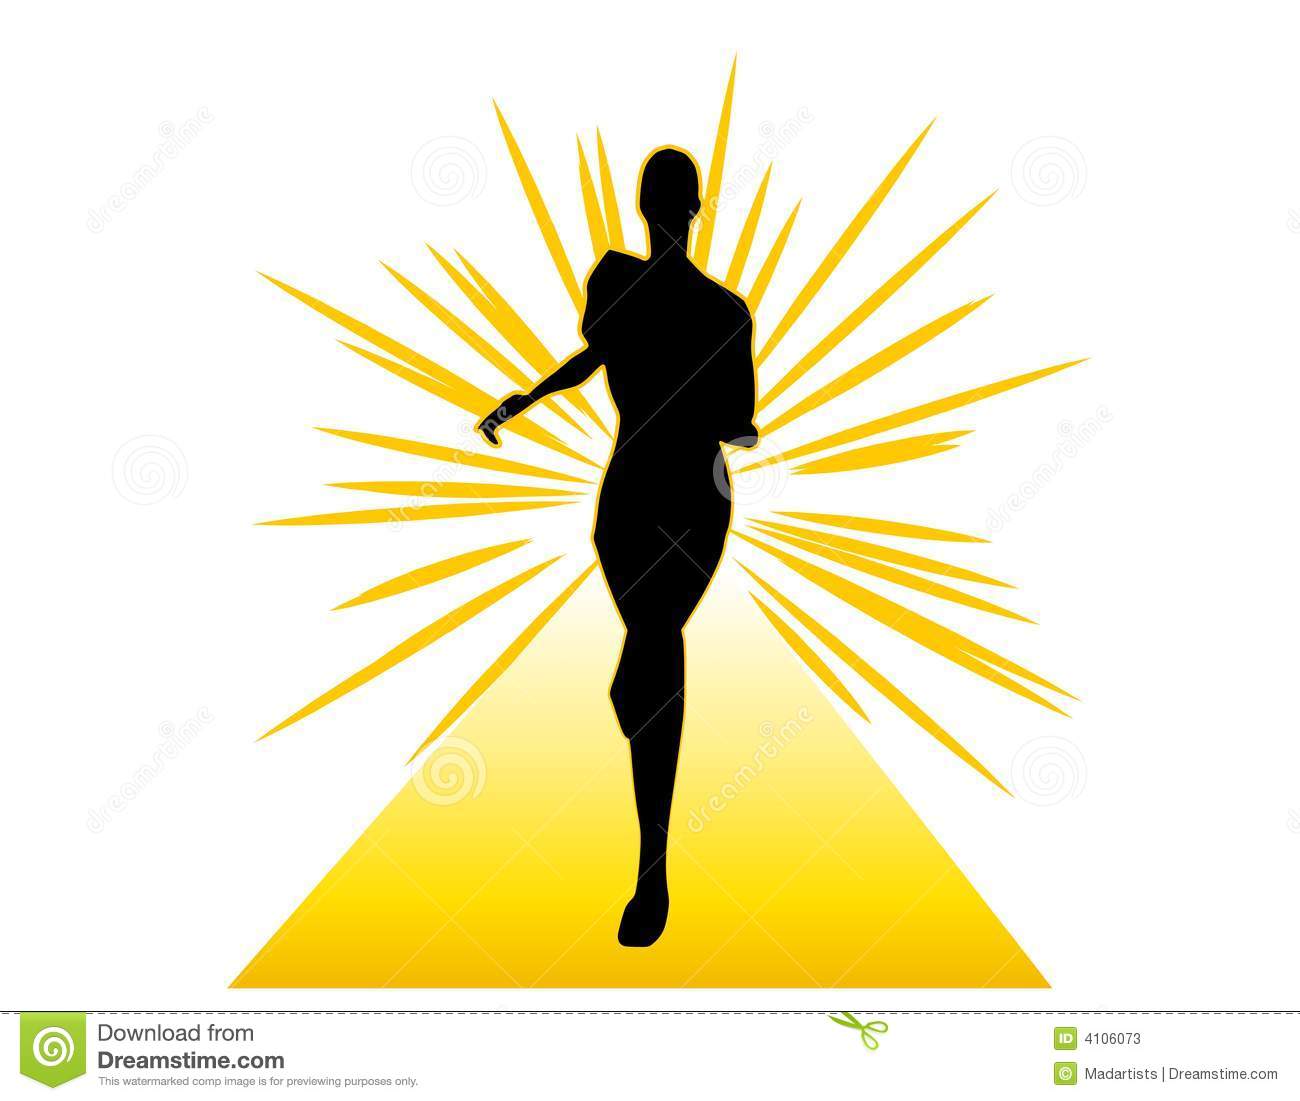 Clip Art Illustration Featuring A Female Runner On A Gold Surface